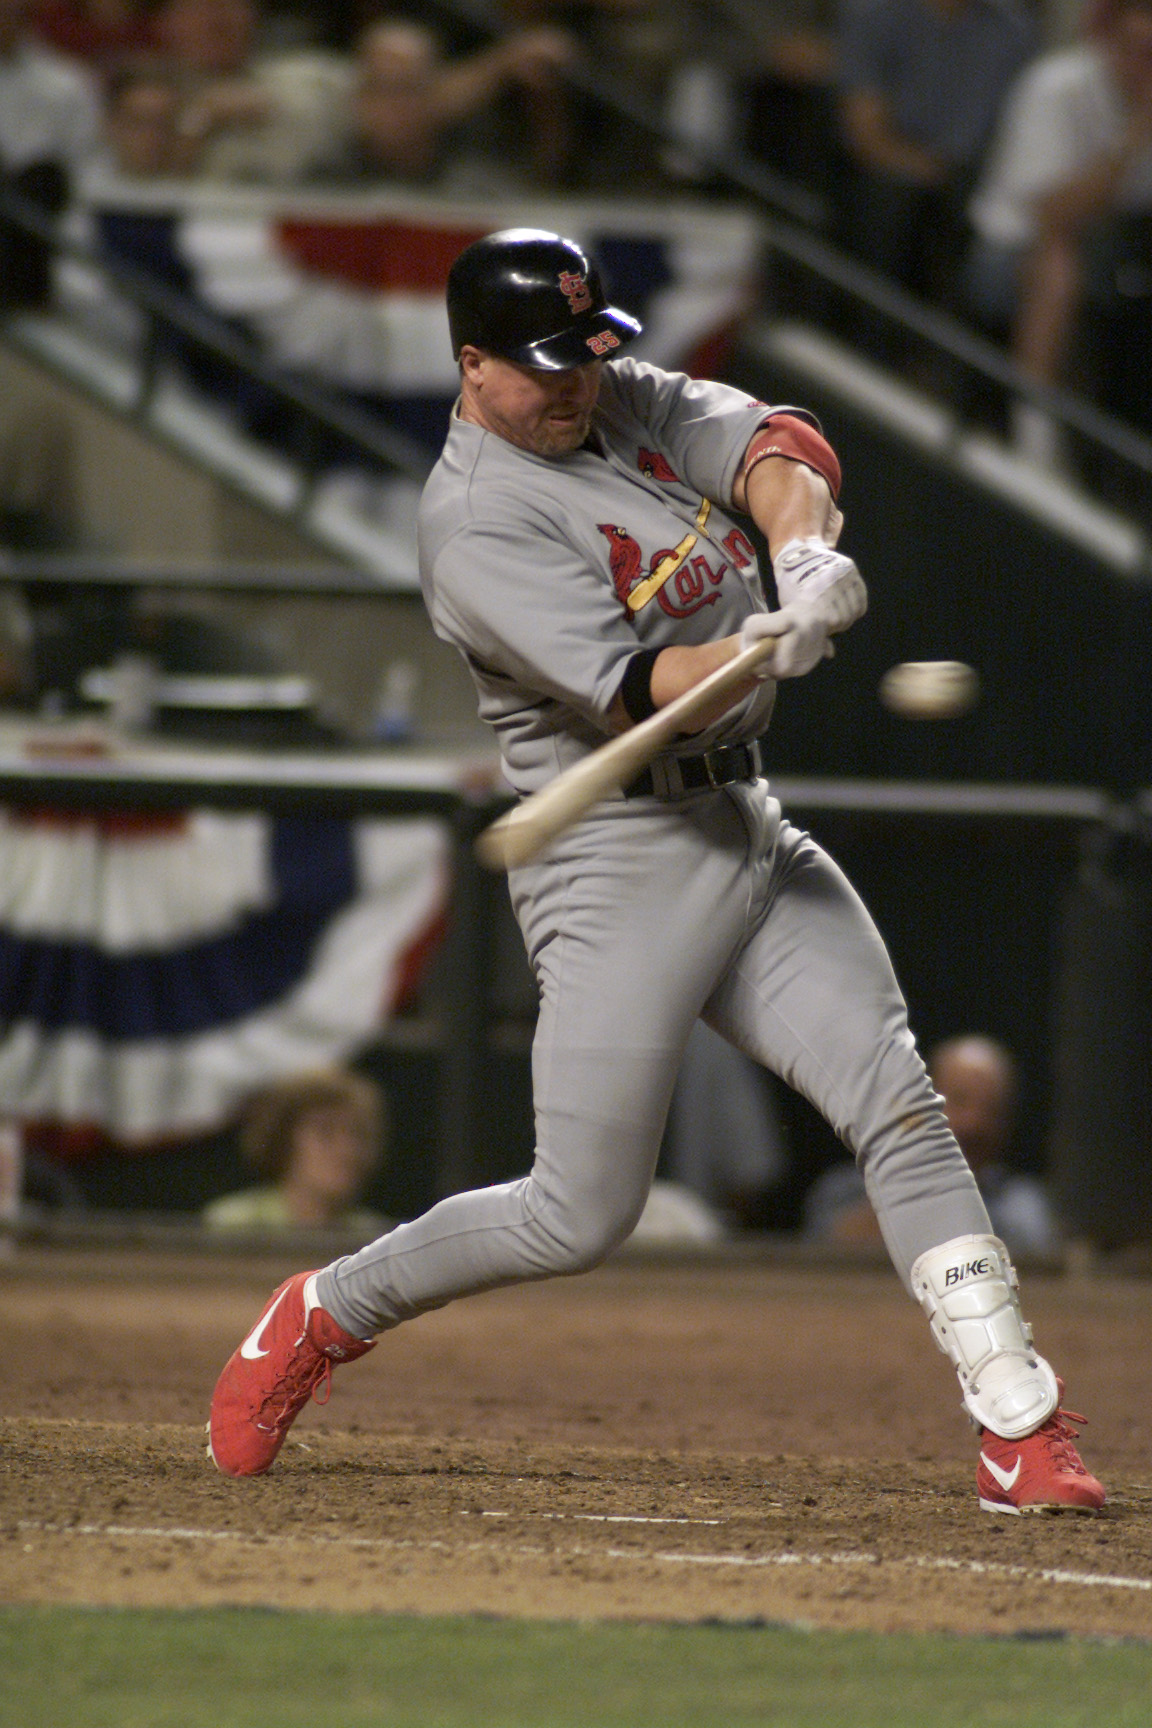 9 Oct 2001:  Mark McGwire #25 of the St. Louis Cardinals swings at a pitch during game one of the National League West Divisional Series against the Arizona Diamondbacks at Bank One Ballpark in Phoenix, Arizona. The Diamondbacks win 1-0 over the Cardinals